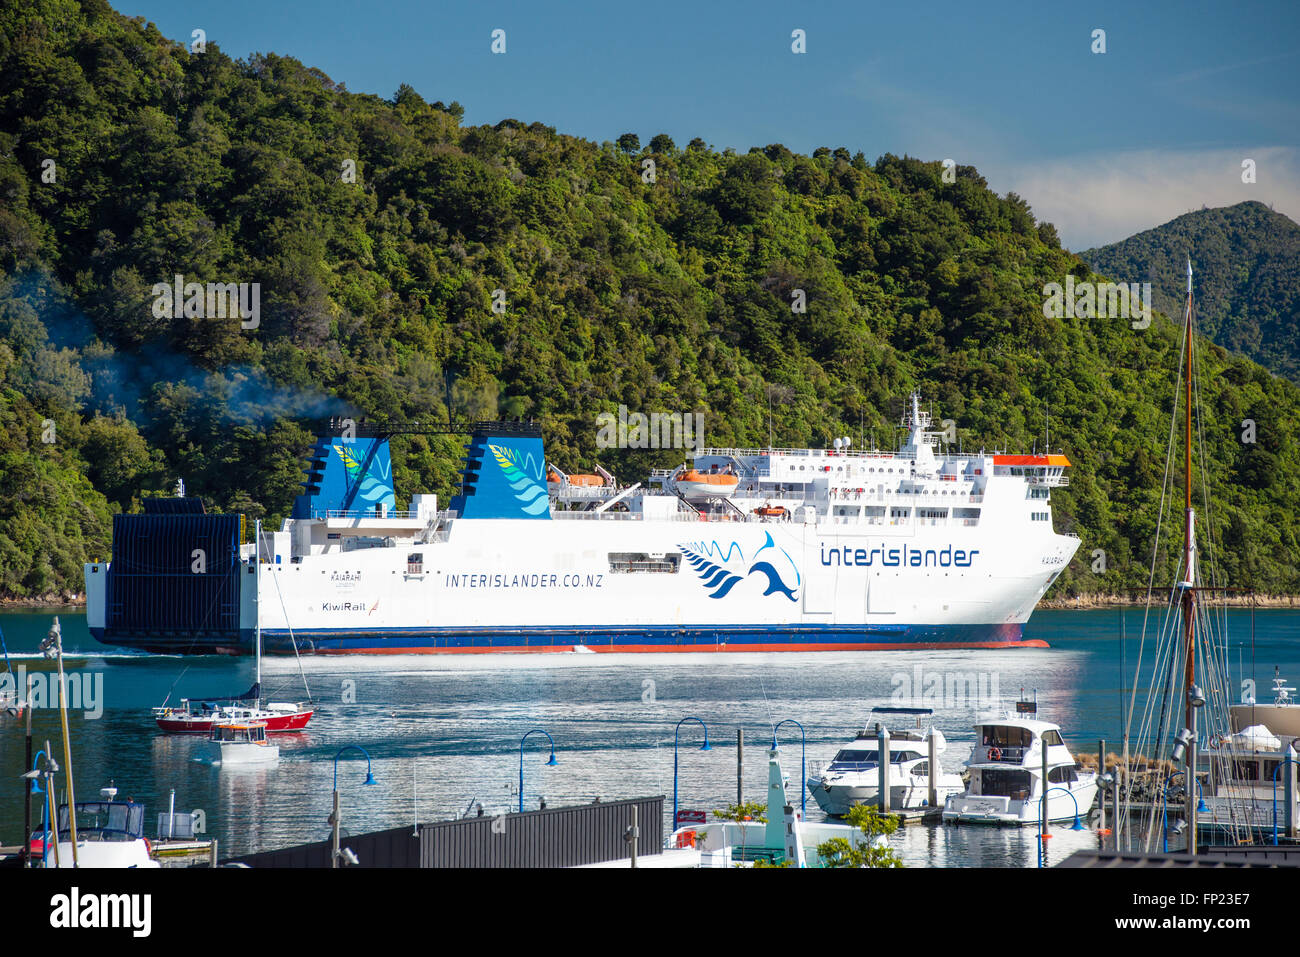 PICTON, NEW ZEALAND - DEC 14, 2015: Interisander's Cook Strait ferry departs from Picton Port. Stock Photo